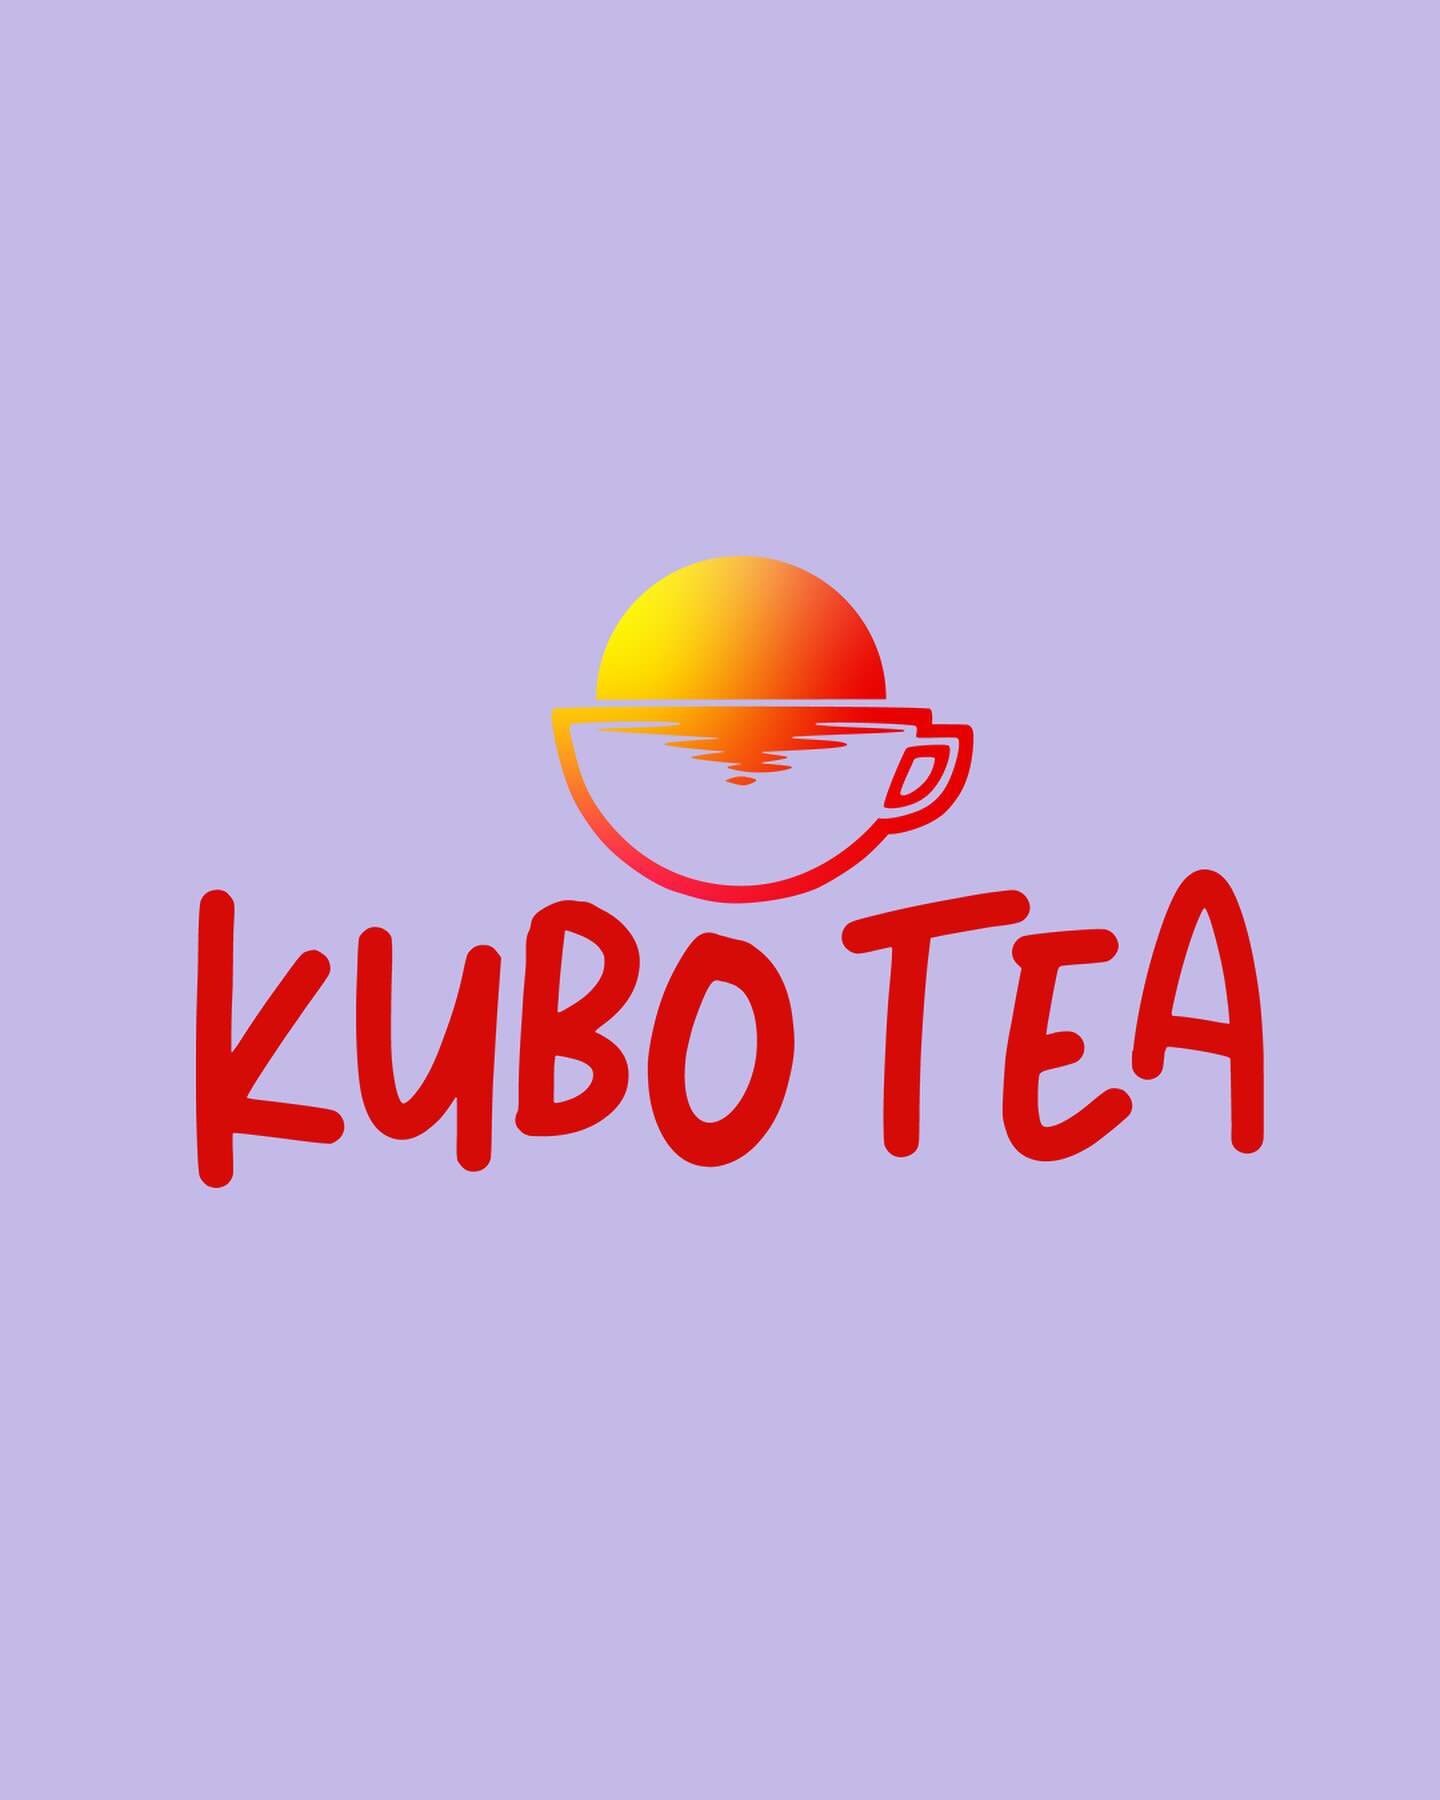 Kubo Tea 🍵⚡️ @kubo_tea 

Kubo&rsquo;s magical tea changed the game for this highly anxious, jitter bug. It&rsquo;s magic. Jack (this coolest founder behind this totally kick ass brand) literally worked magic 🪄 creating flavor-packed, sugar free ble